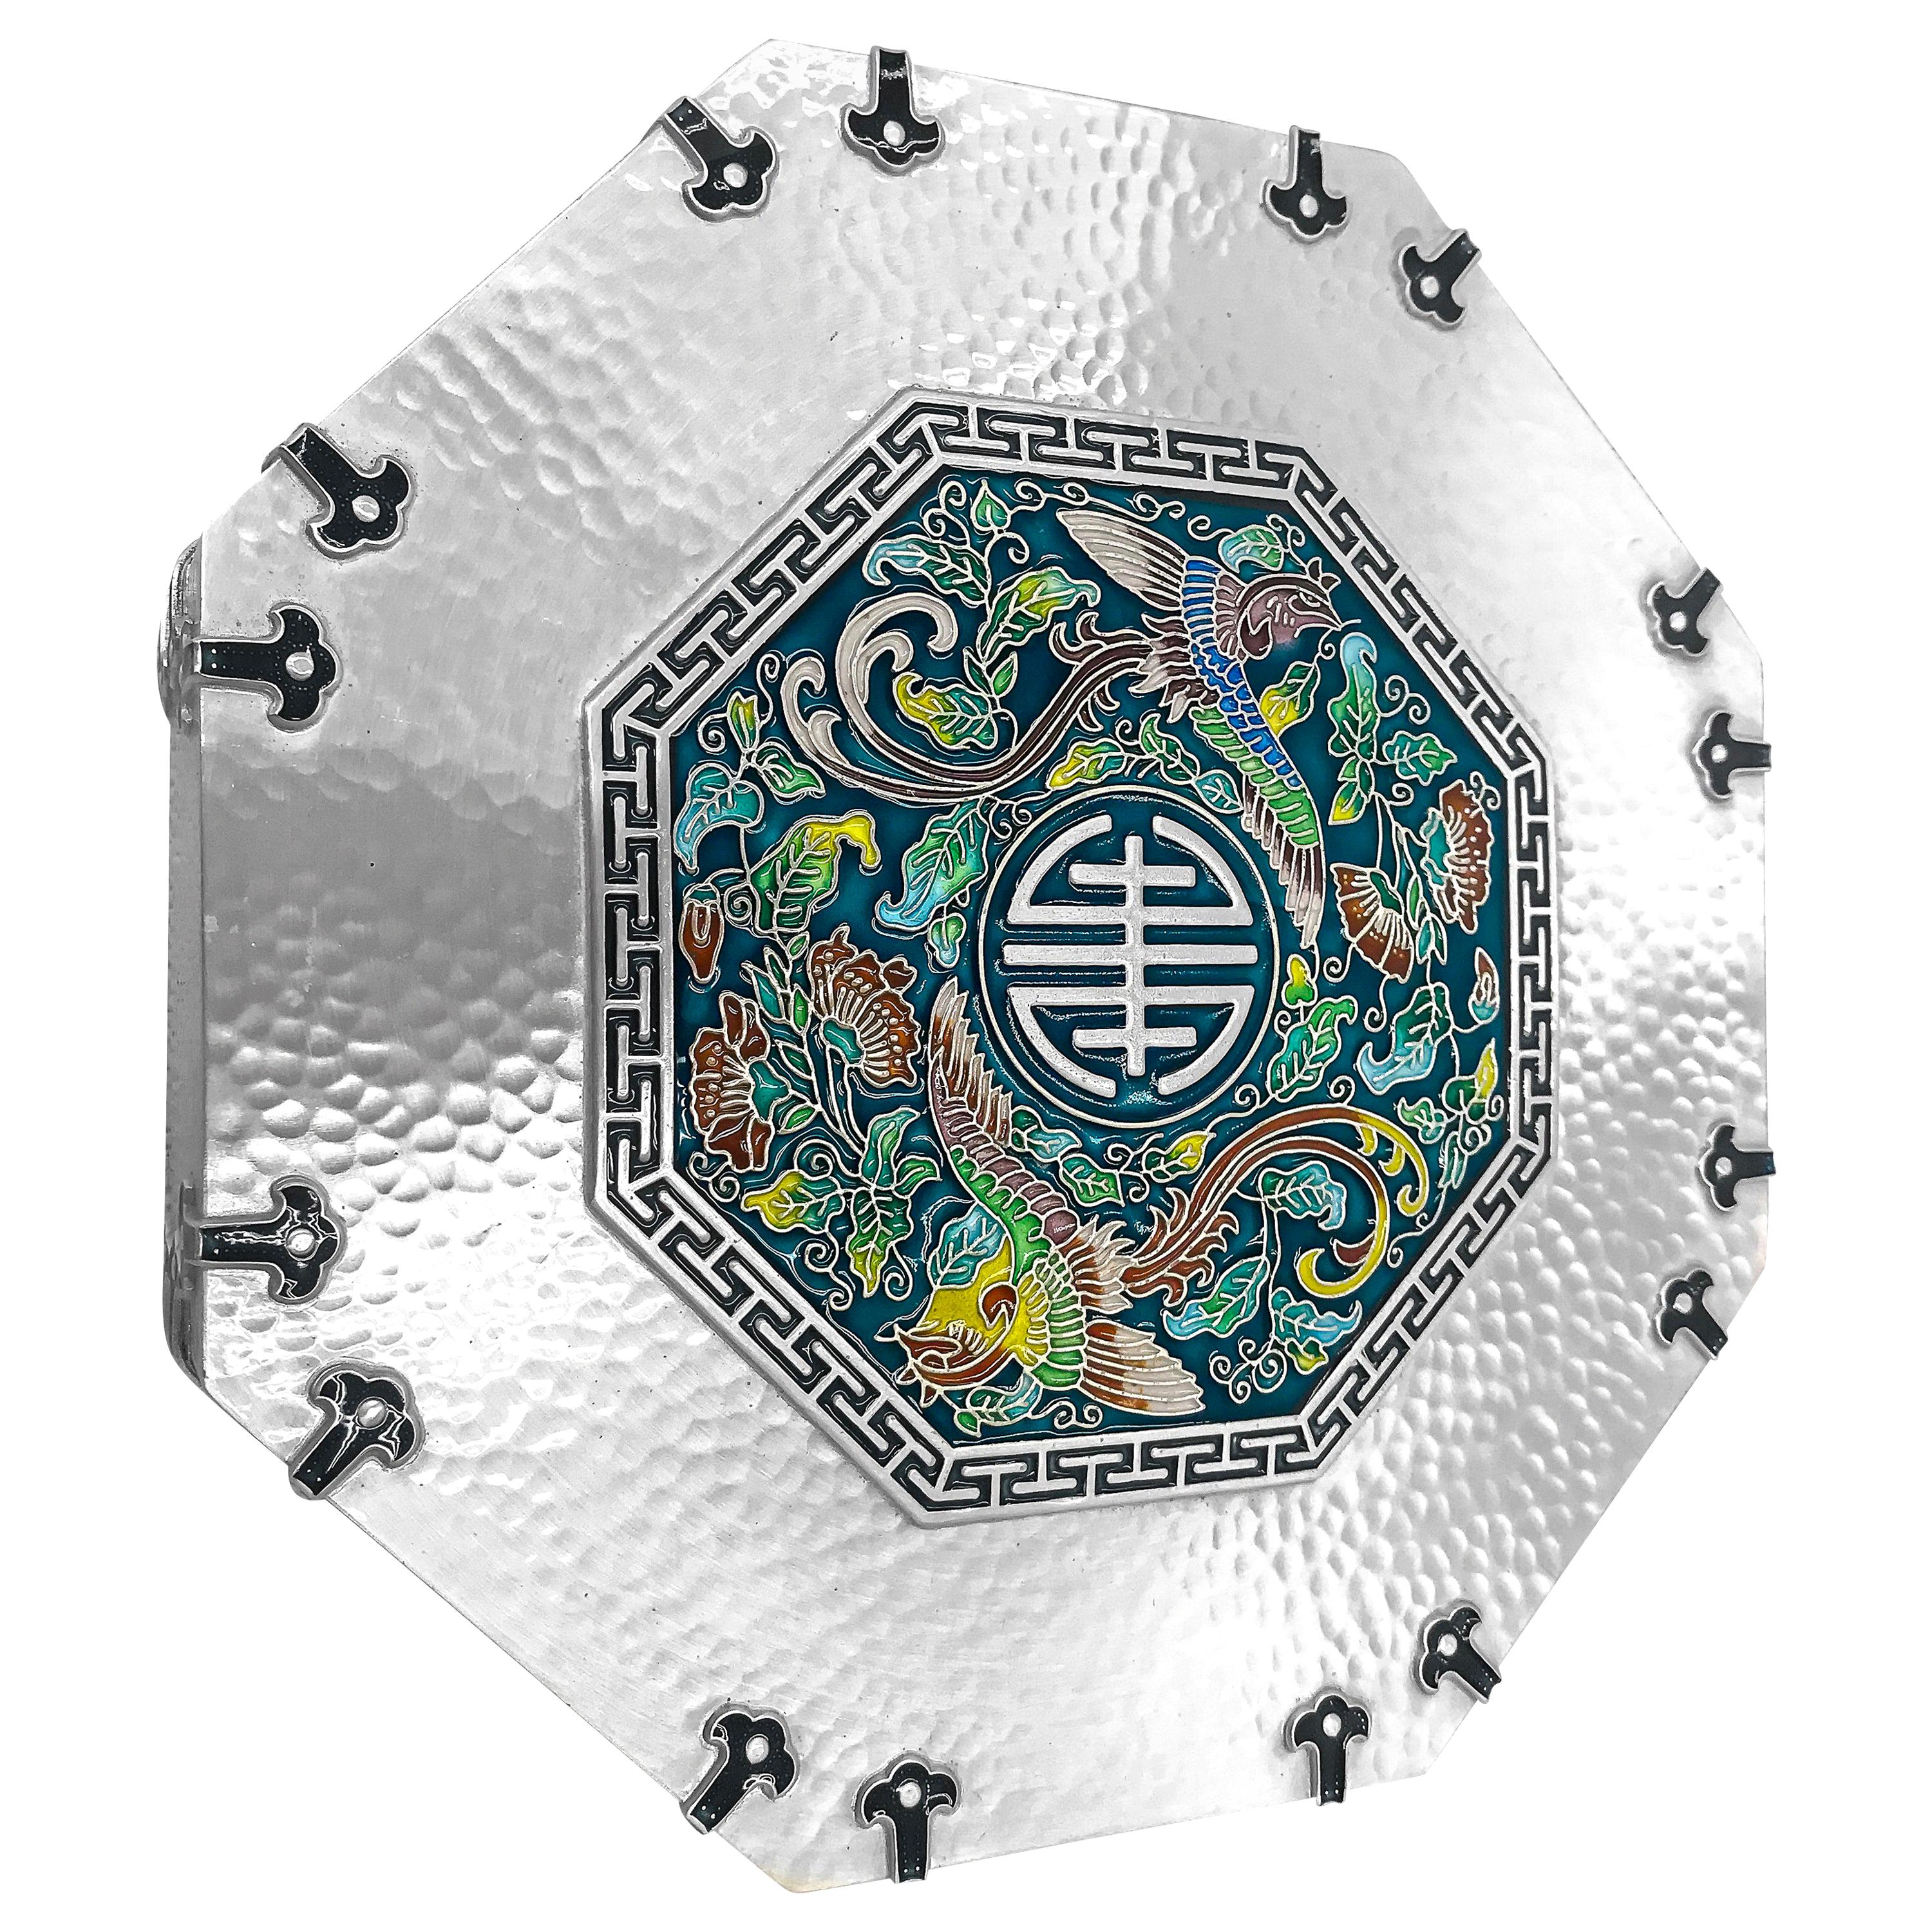 Enamel Octagon Silver Box with 5 Sections Inside, 0.99 Karat Silver For Sale